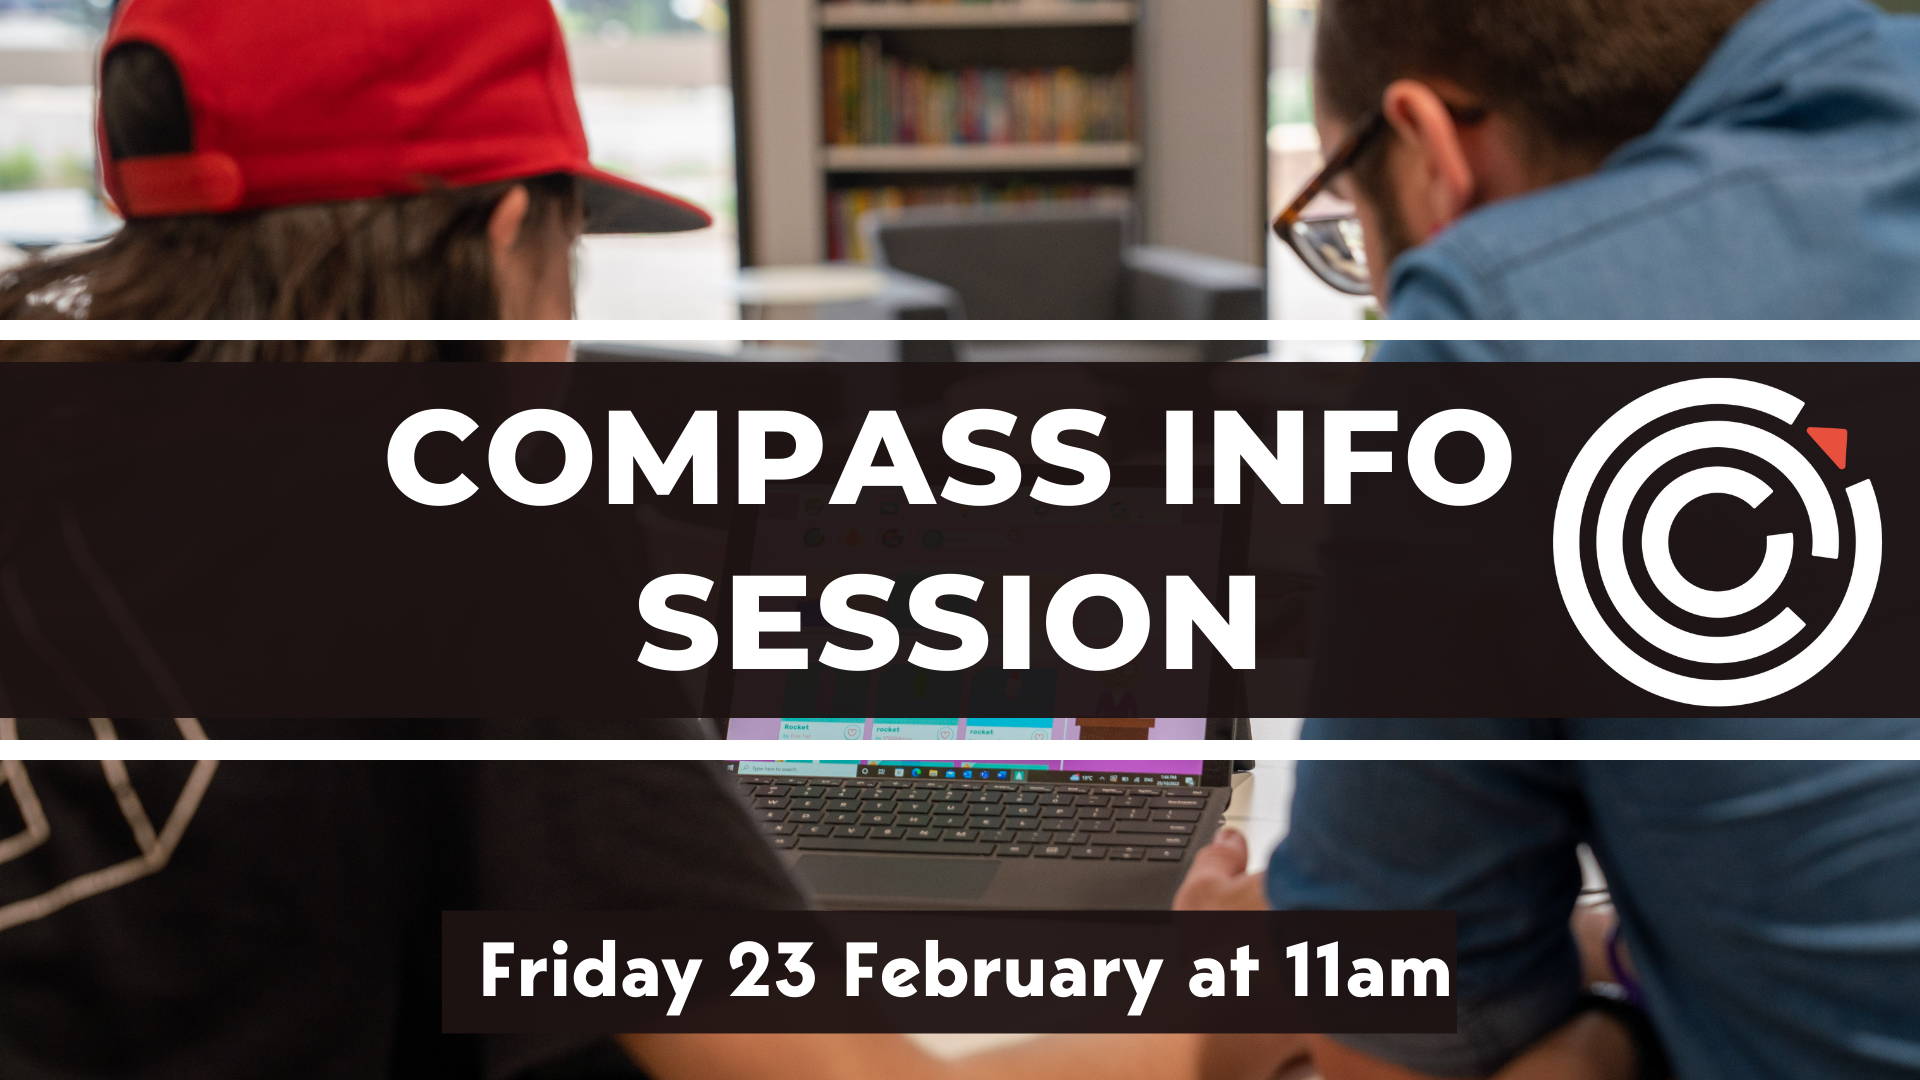 Compass Info Session - Friday 23 February 